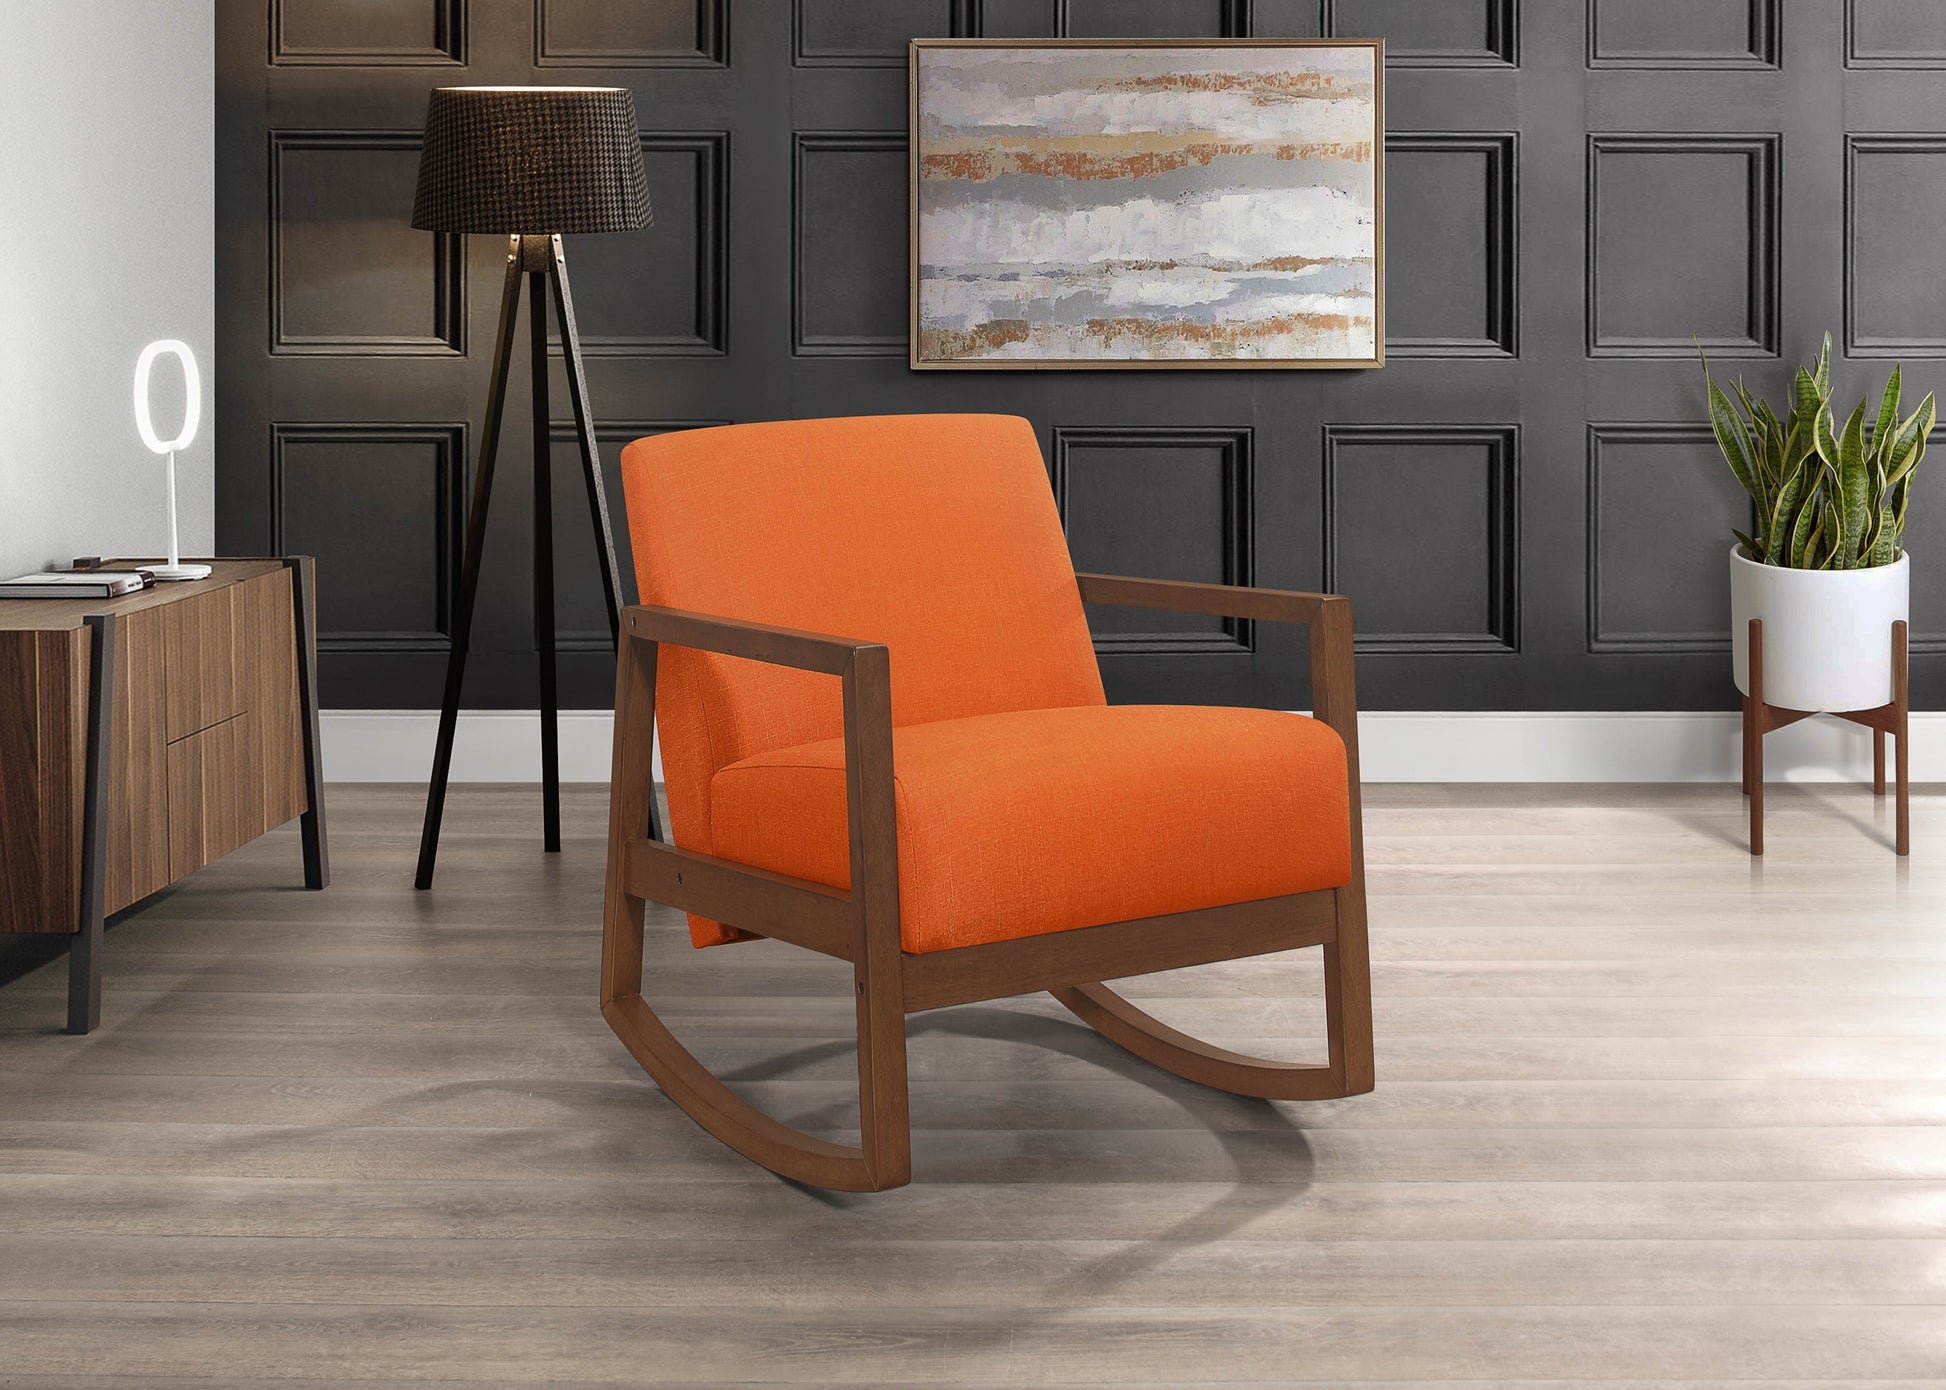 1pc Rocker Accent Chair Modern Living Room Plush orange-primary living space-modern-solid wood